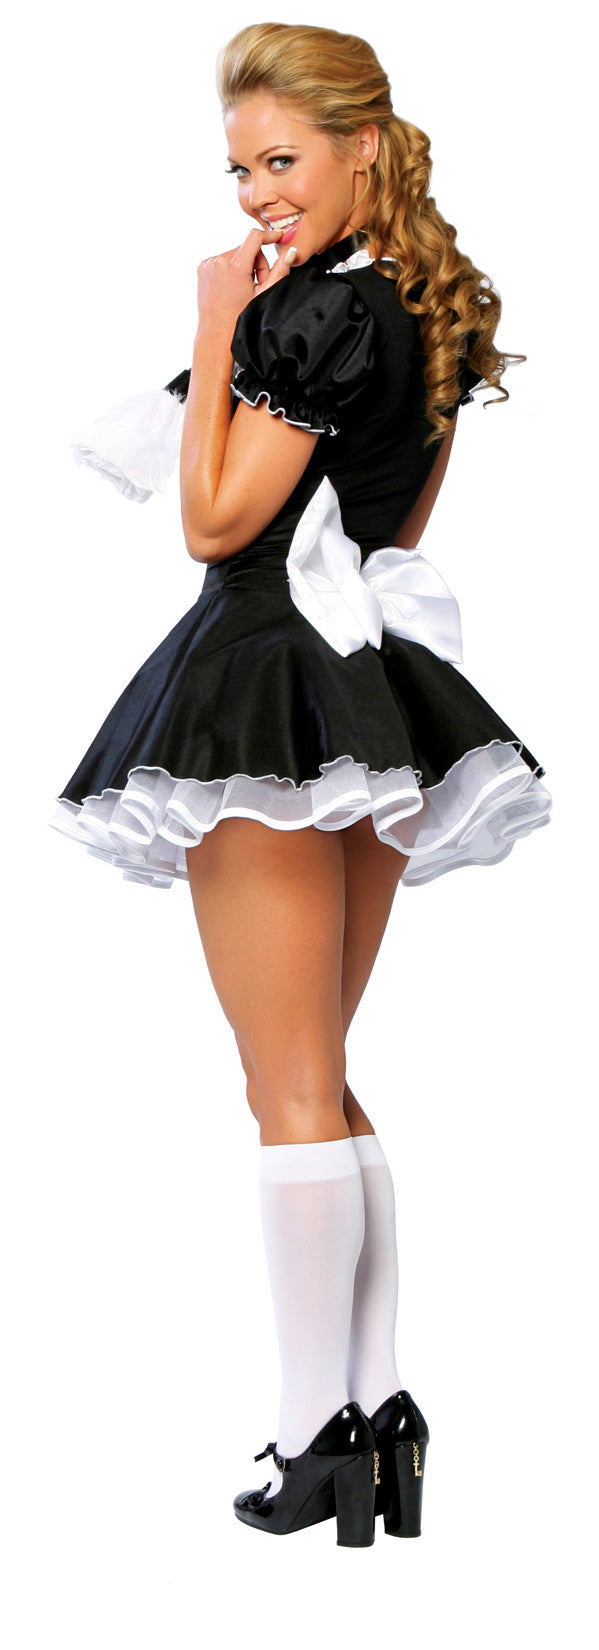 Blonde Teen French Maid